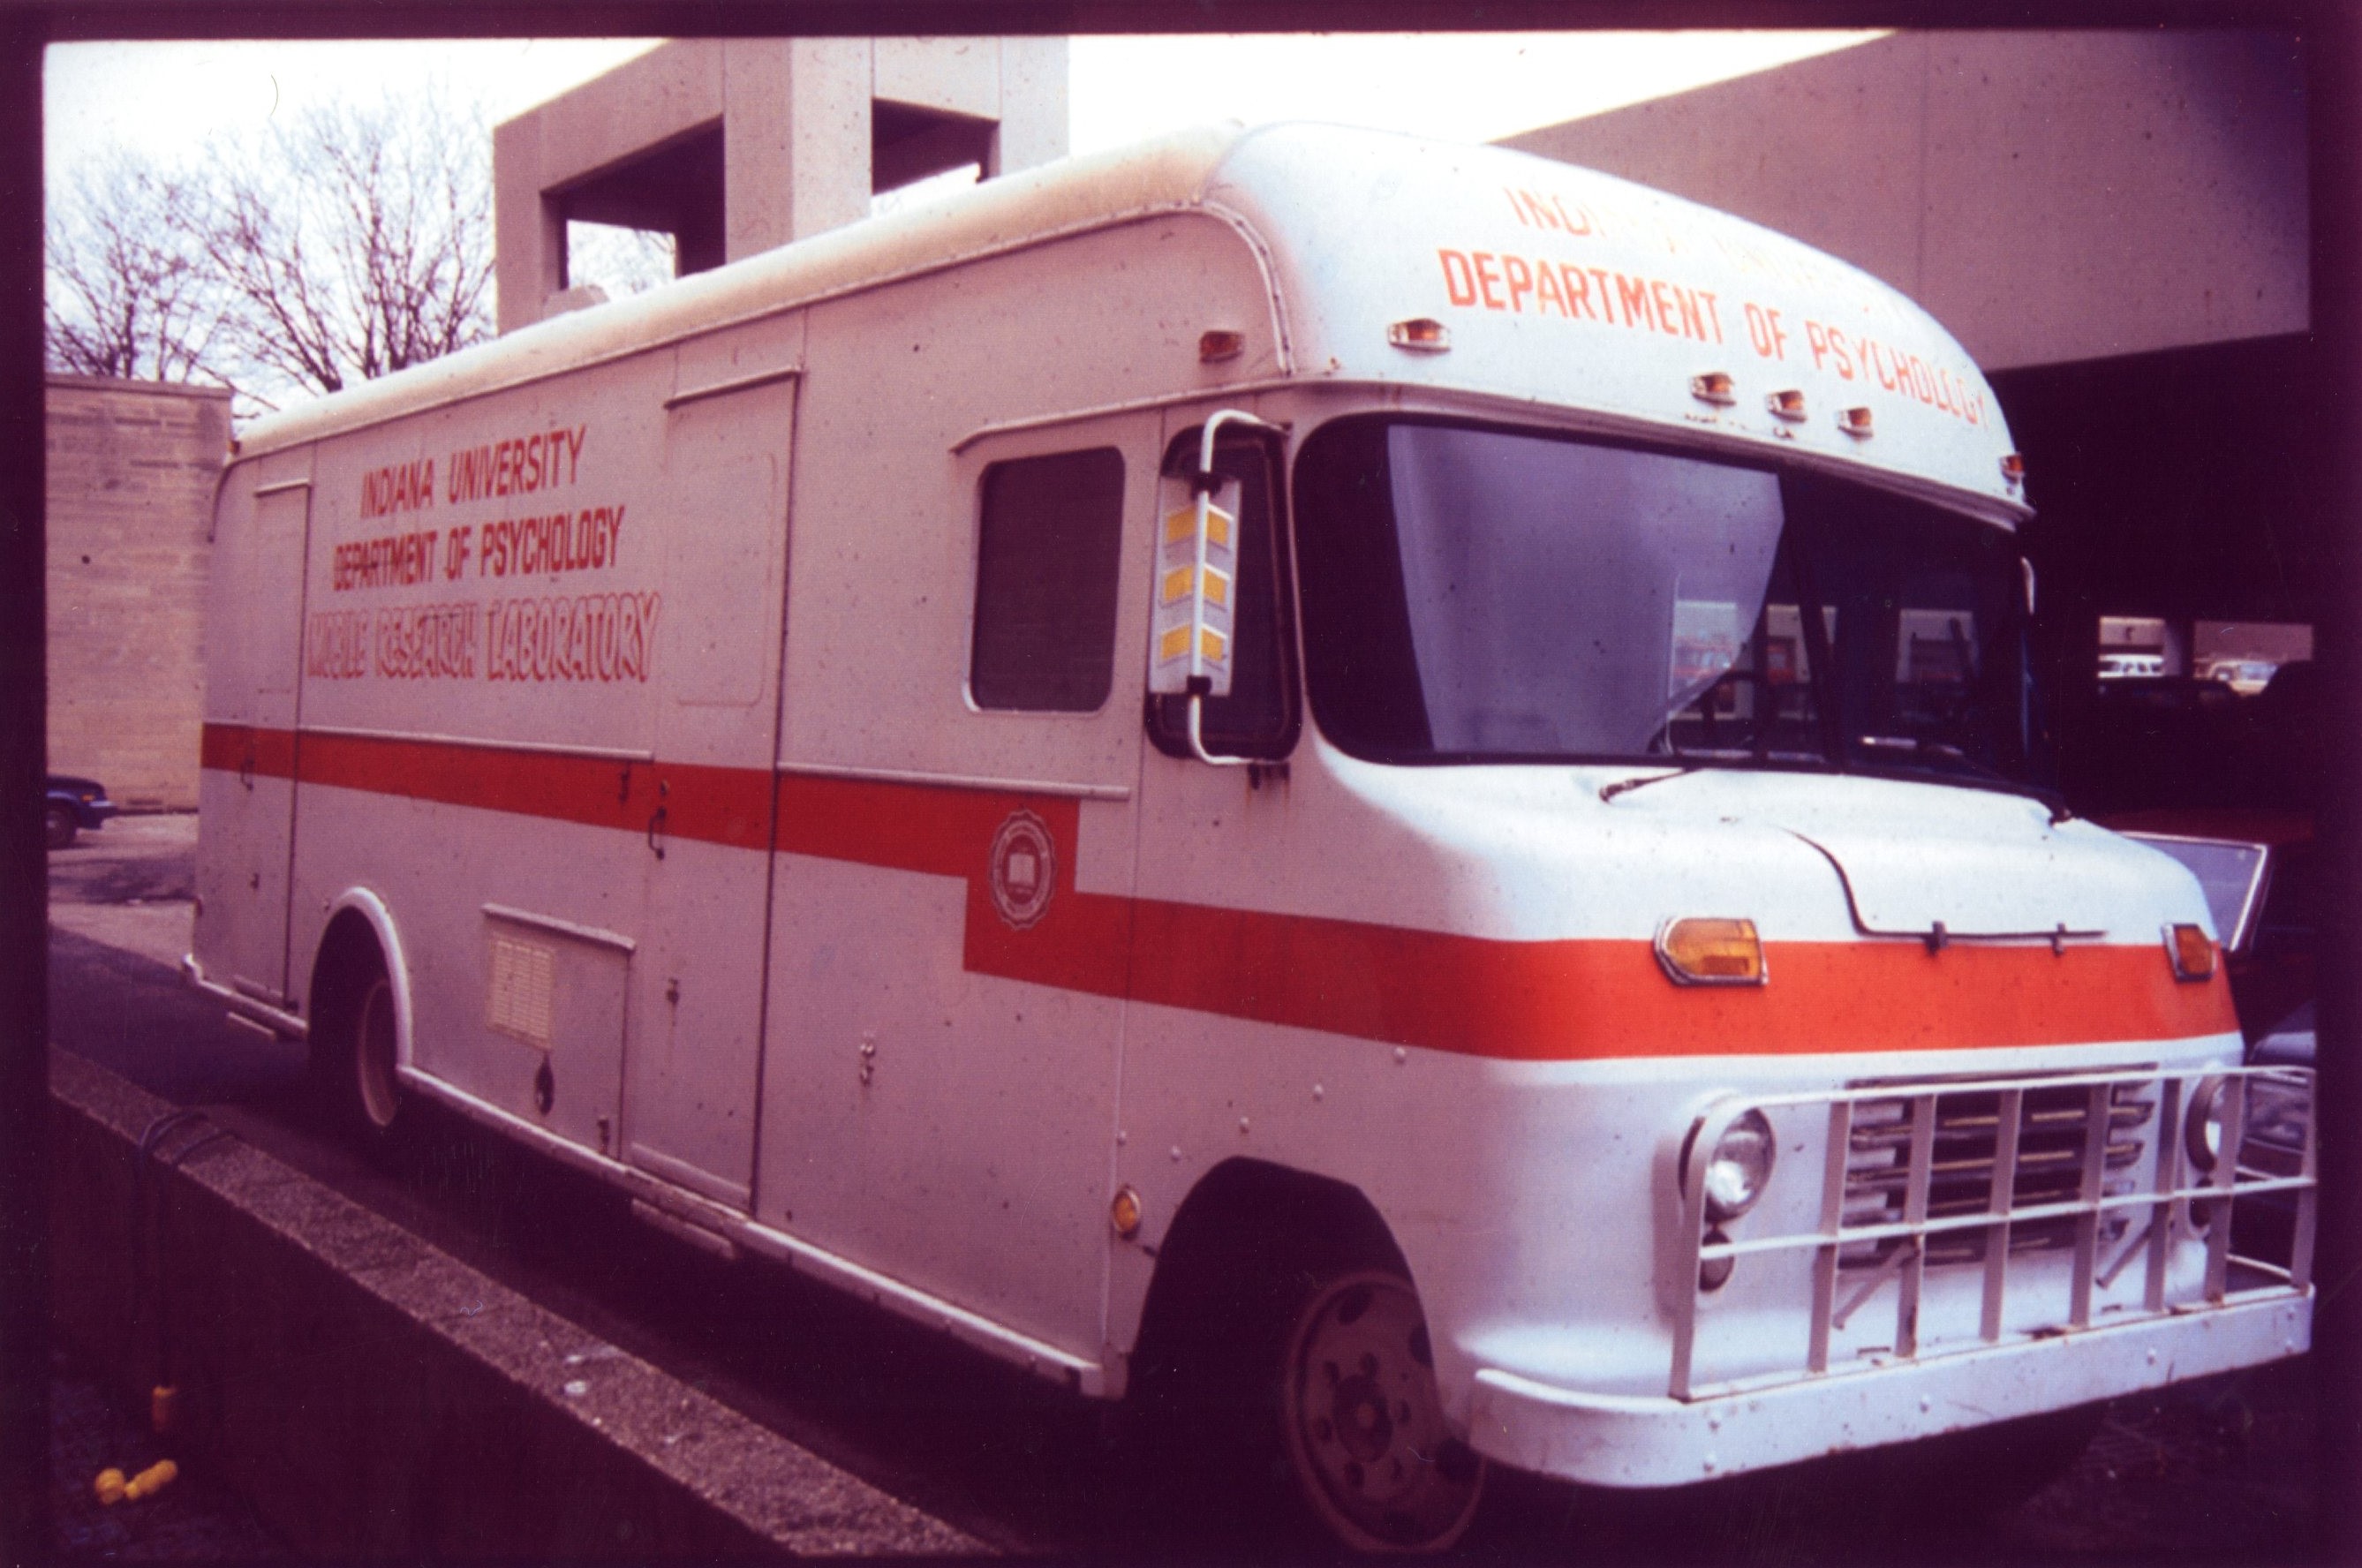 The Mobile Research Laboratory, a bus containing portable research equipment for the IU Department of Psychology